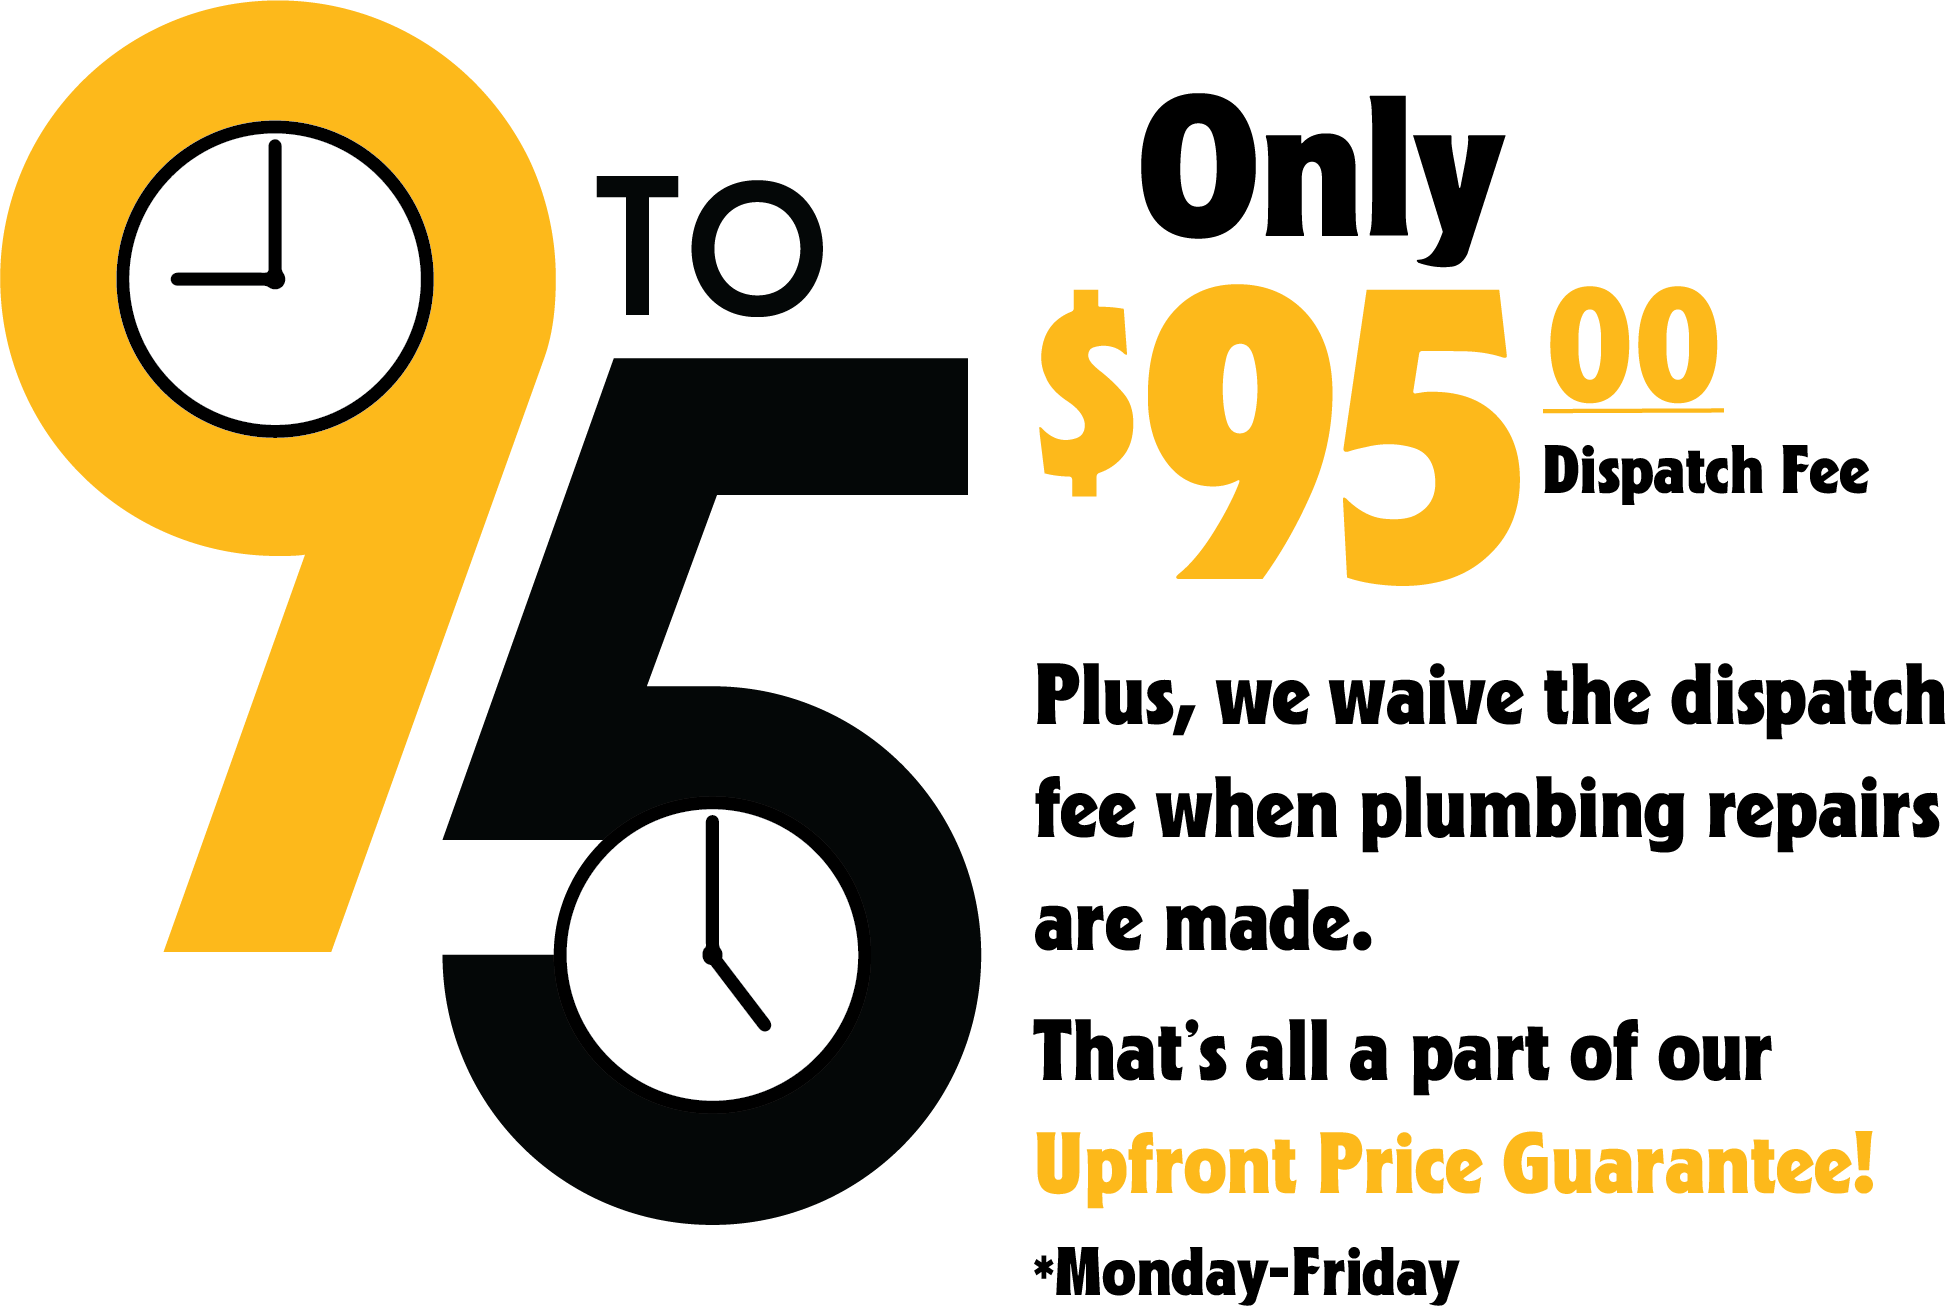 9 to 5 - Only $95 dispatch fee